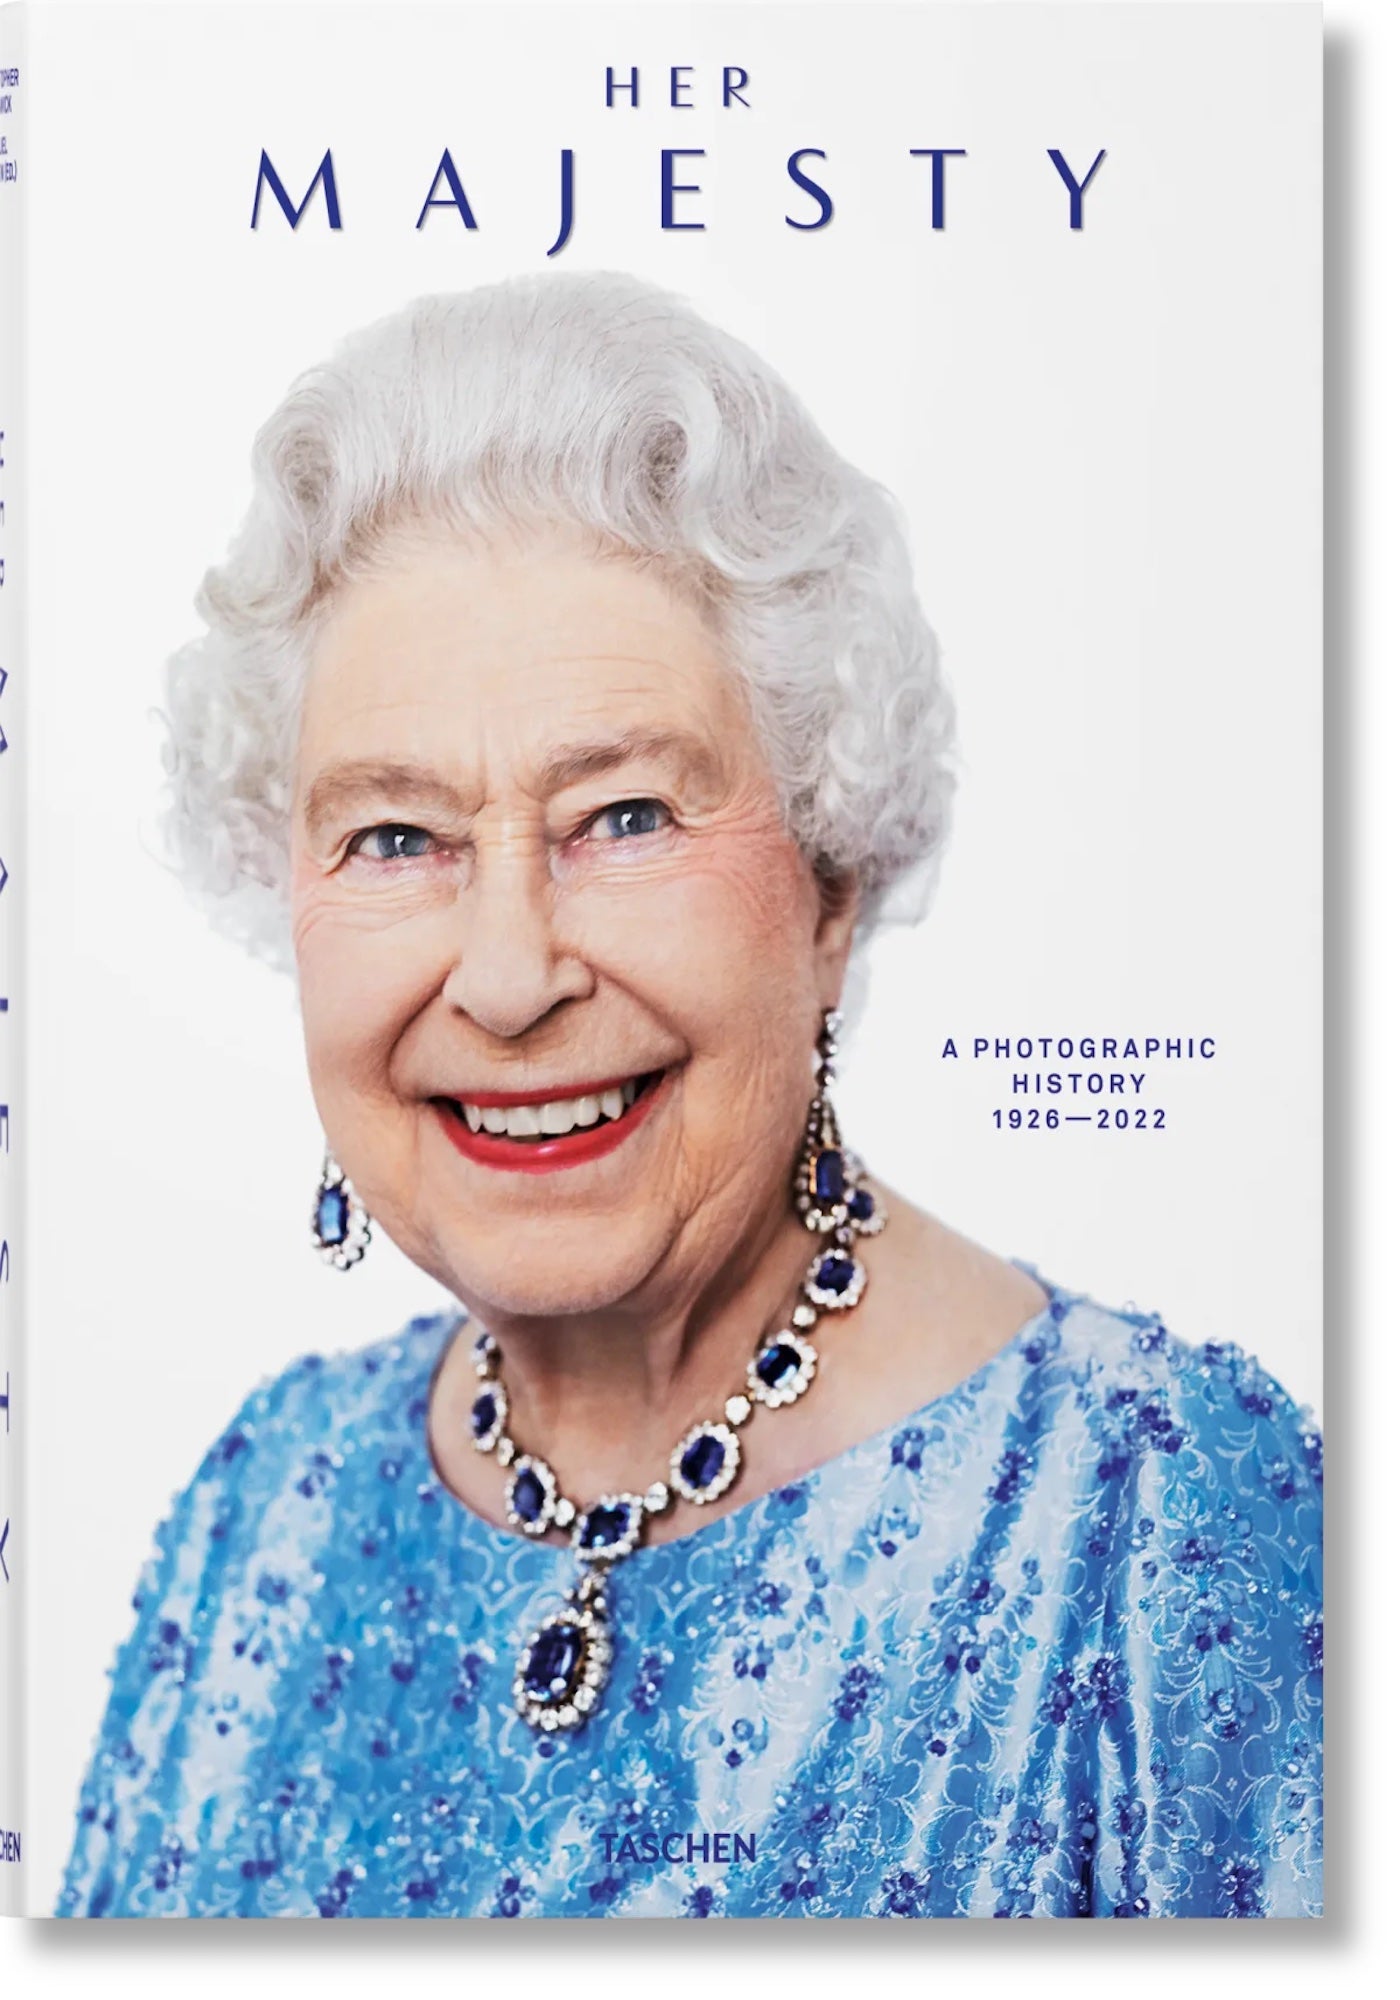 HER MAJESTY. A PHOTOGRAPHIC HISTORY 1926–2022